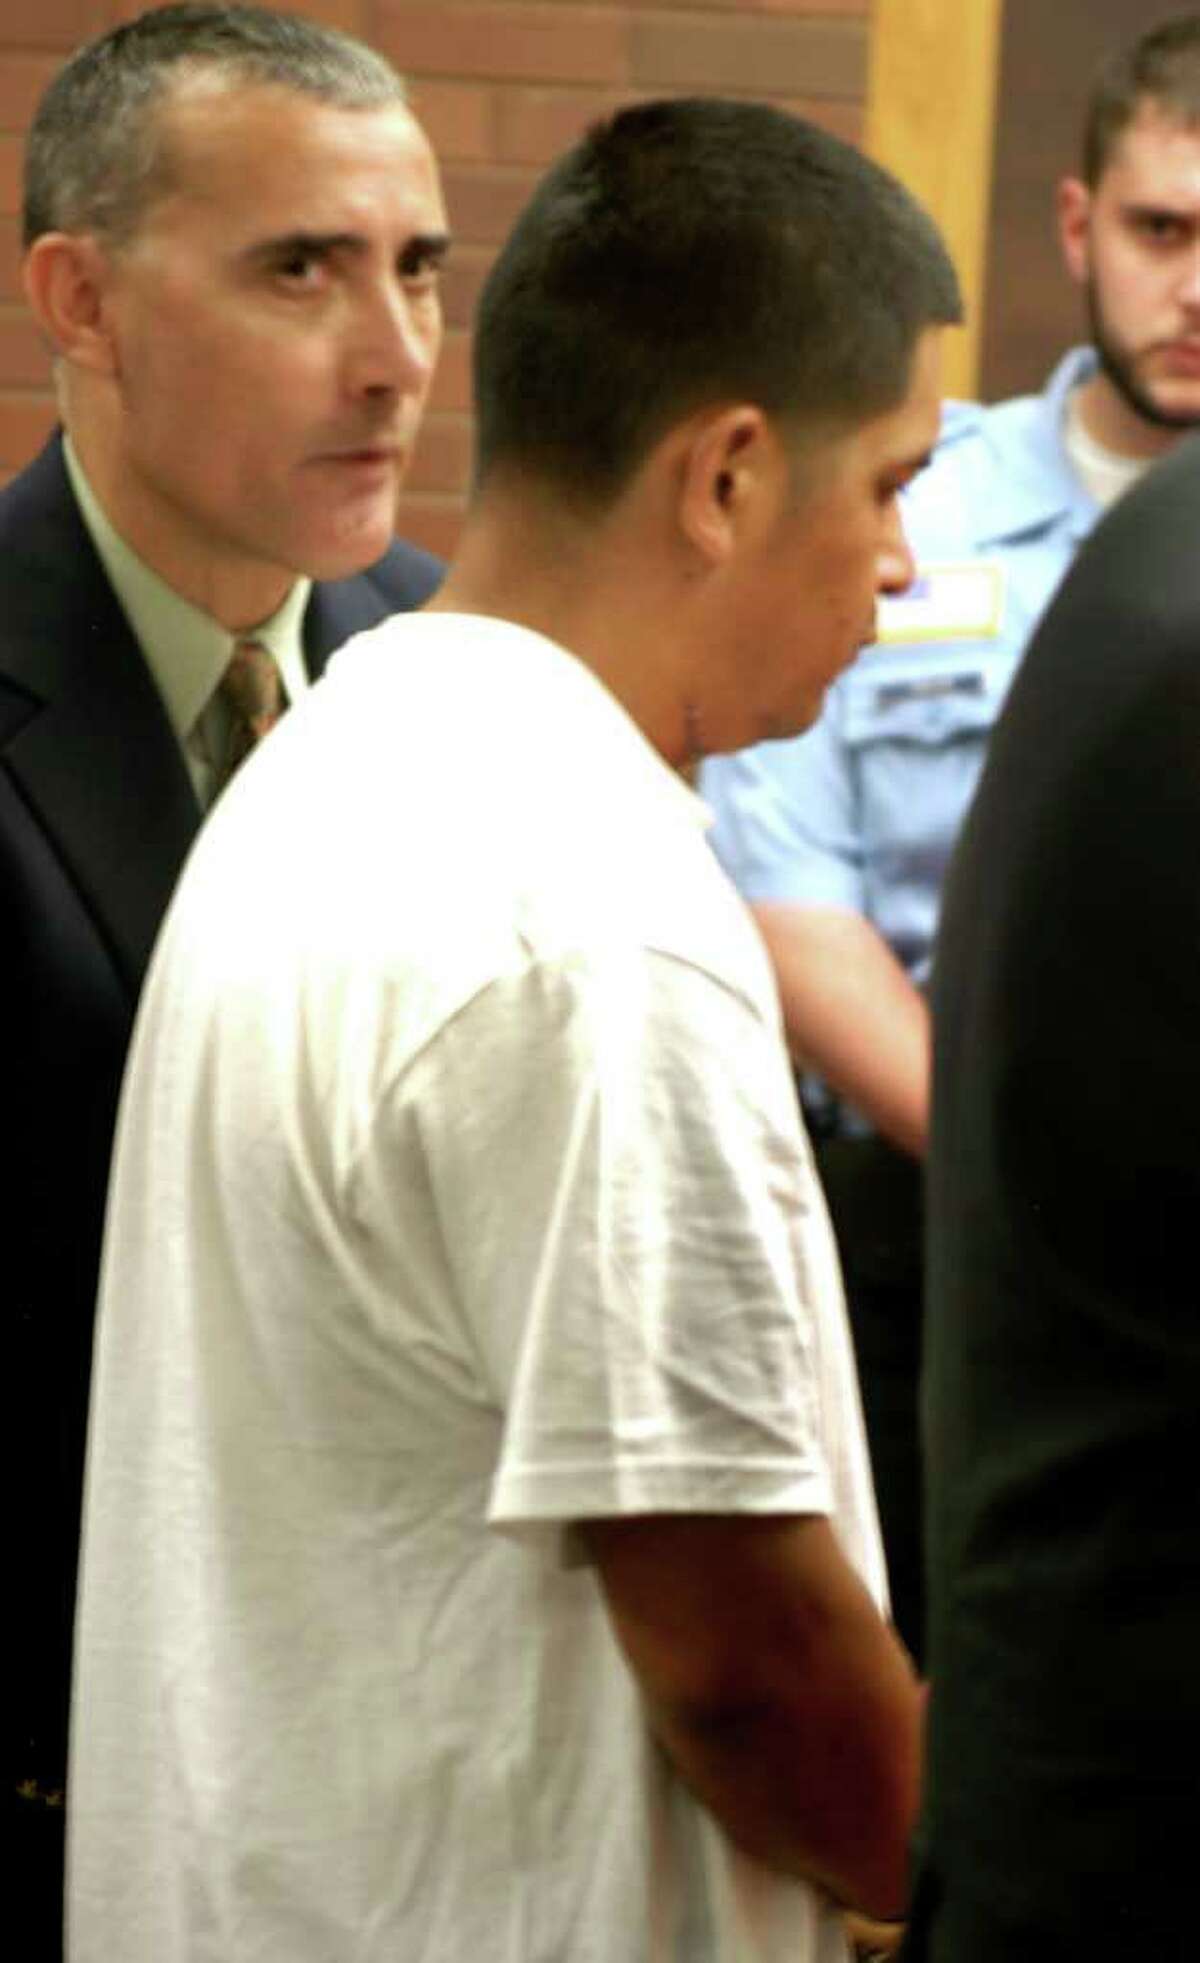 Interpreter Javier Lillo, left, looks on as Arturo Dota, the Danbury man accused of killing Natalie Ramirez in their Duck Street apartment Monday night, pleads not guilty to murder during an appearance in state Superior Court in Danbury on Thursday, Aug. 25, 2011.